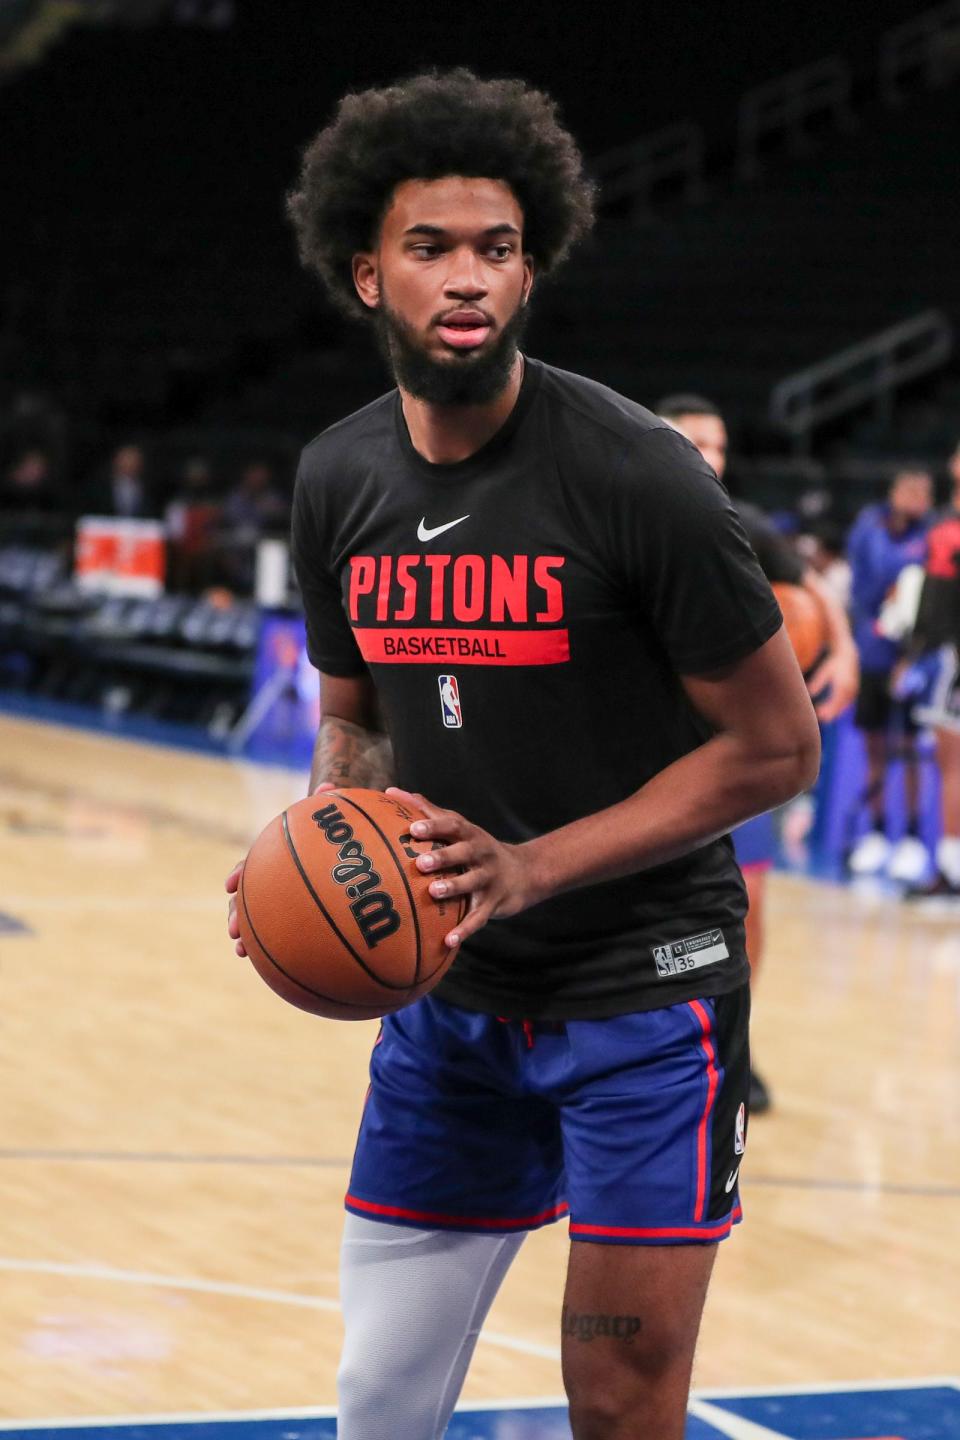 Pistons forward Marvin Bagley takes warmups prior to the preseason game against the Knicks at Madison Square Garden on Tuesday, Oct. 4, 2022.